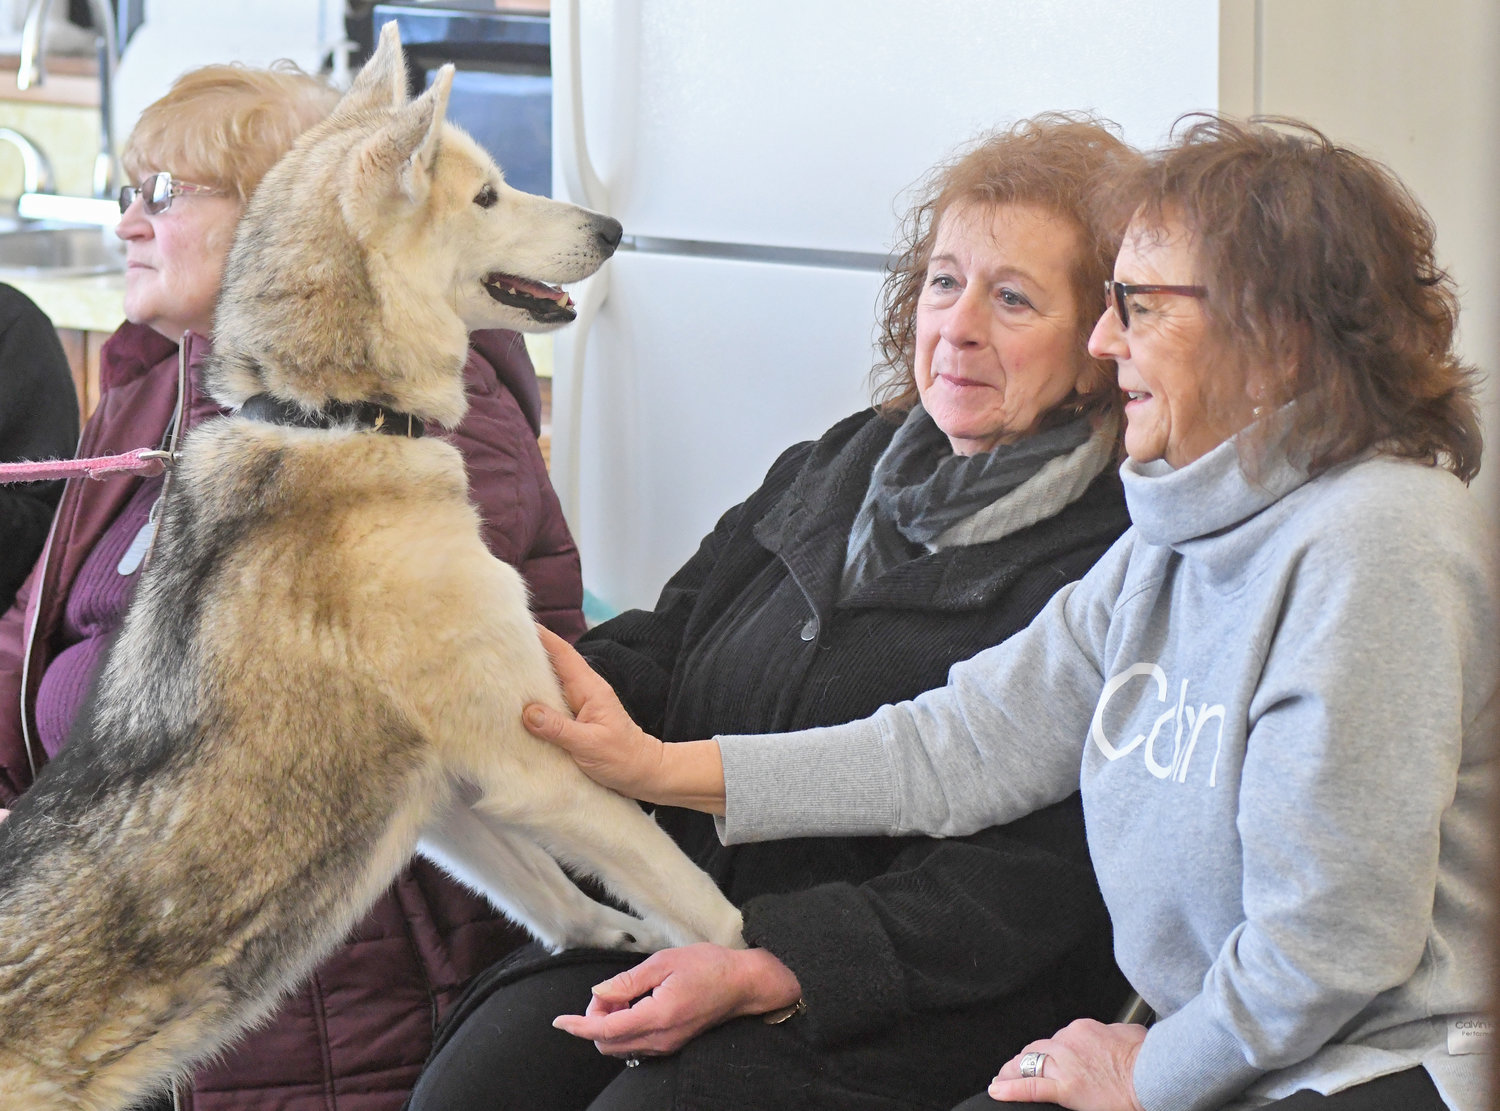 WELCOME TO THE PACK — Raspberry, a sled dog, excitedly greets Annette Sanders and Cindy Flanders during a presentation on sled dogs at the Western Town Library on Wednesday. With several inches of fresh snow on the ground this morning, Raspberry and her canine pals may be itching to hit the trail.